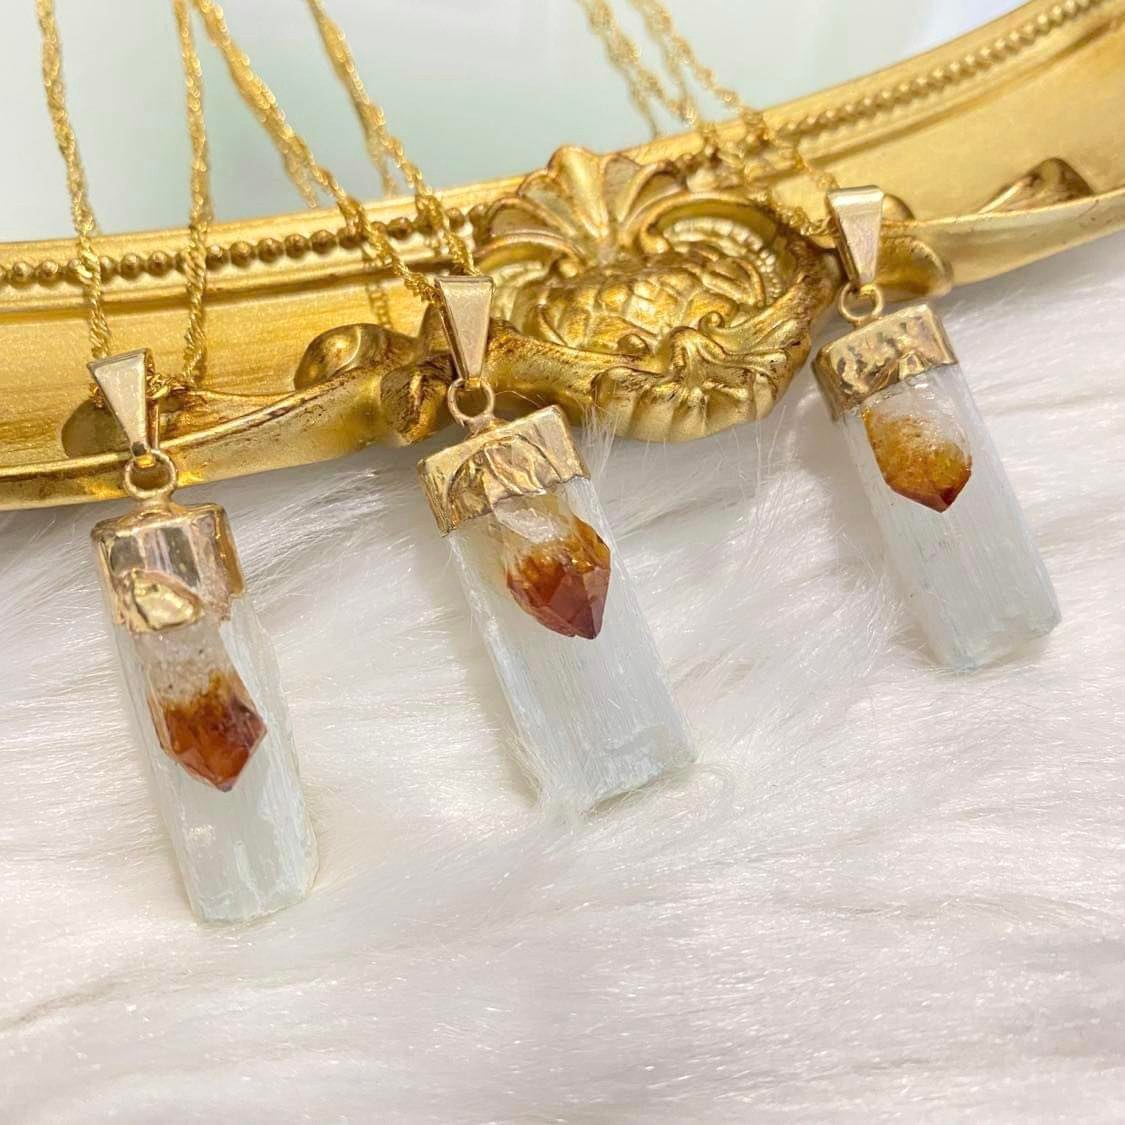 Raw Selenite Crystal Necklace with 18k Gold Dipped Chain